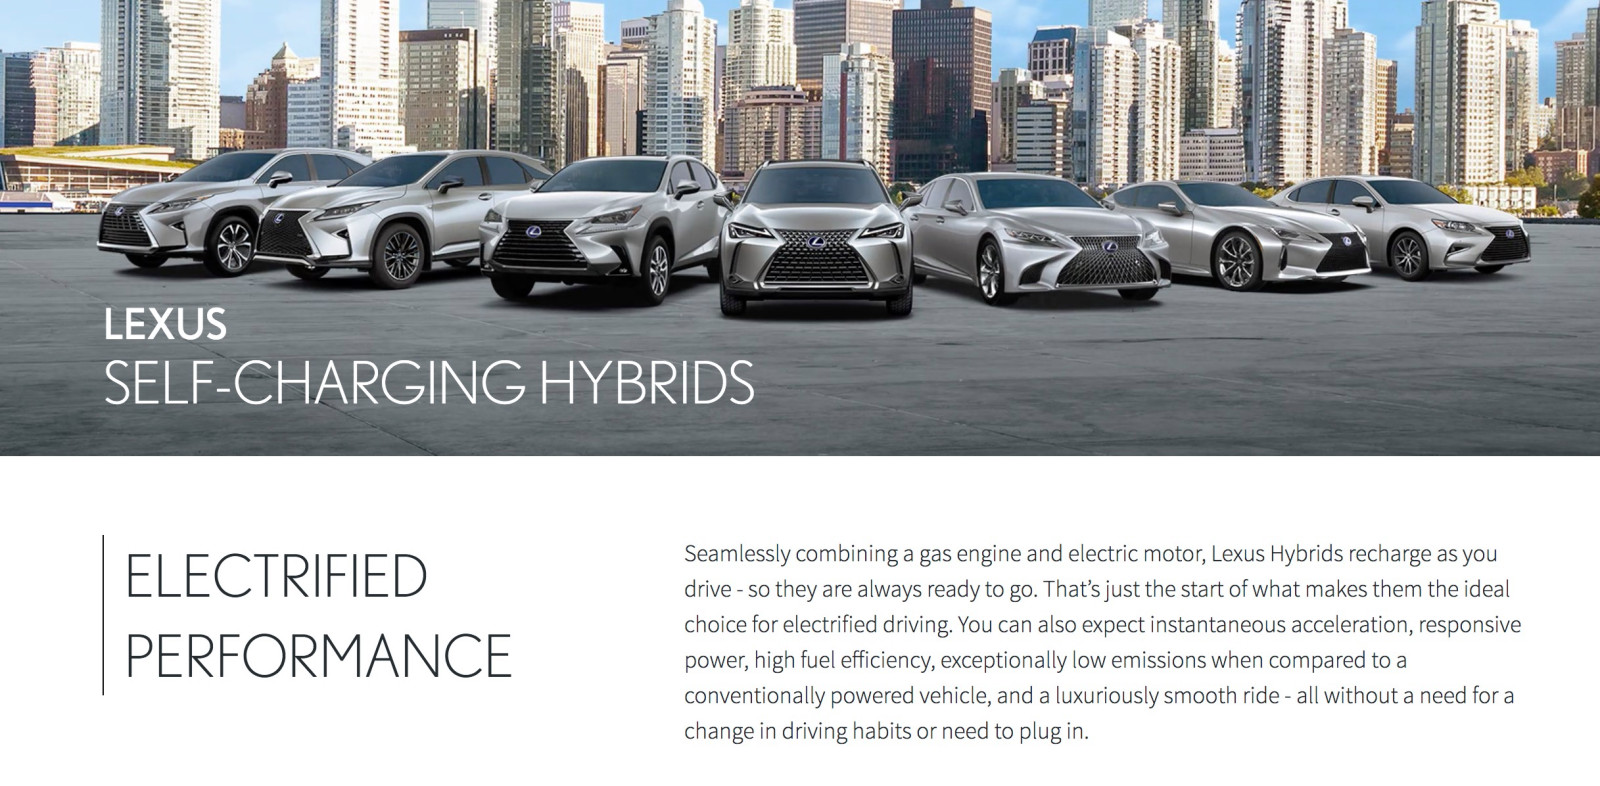 toyota self charging hybrid ad banned norway lie